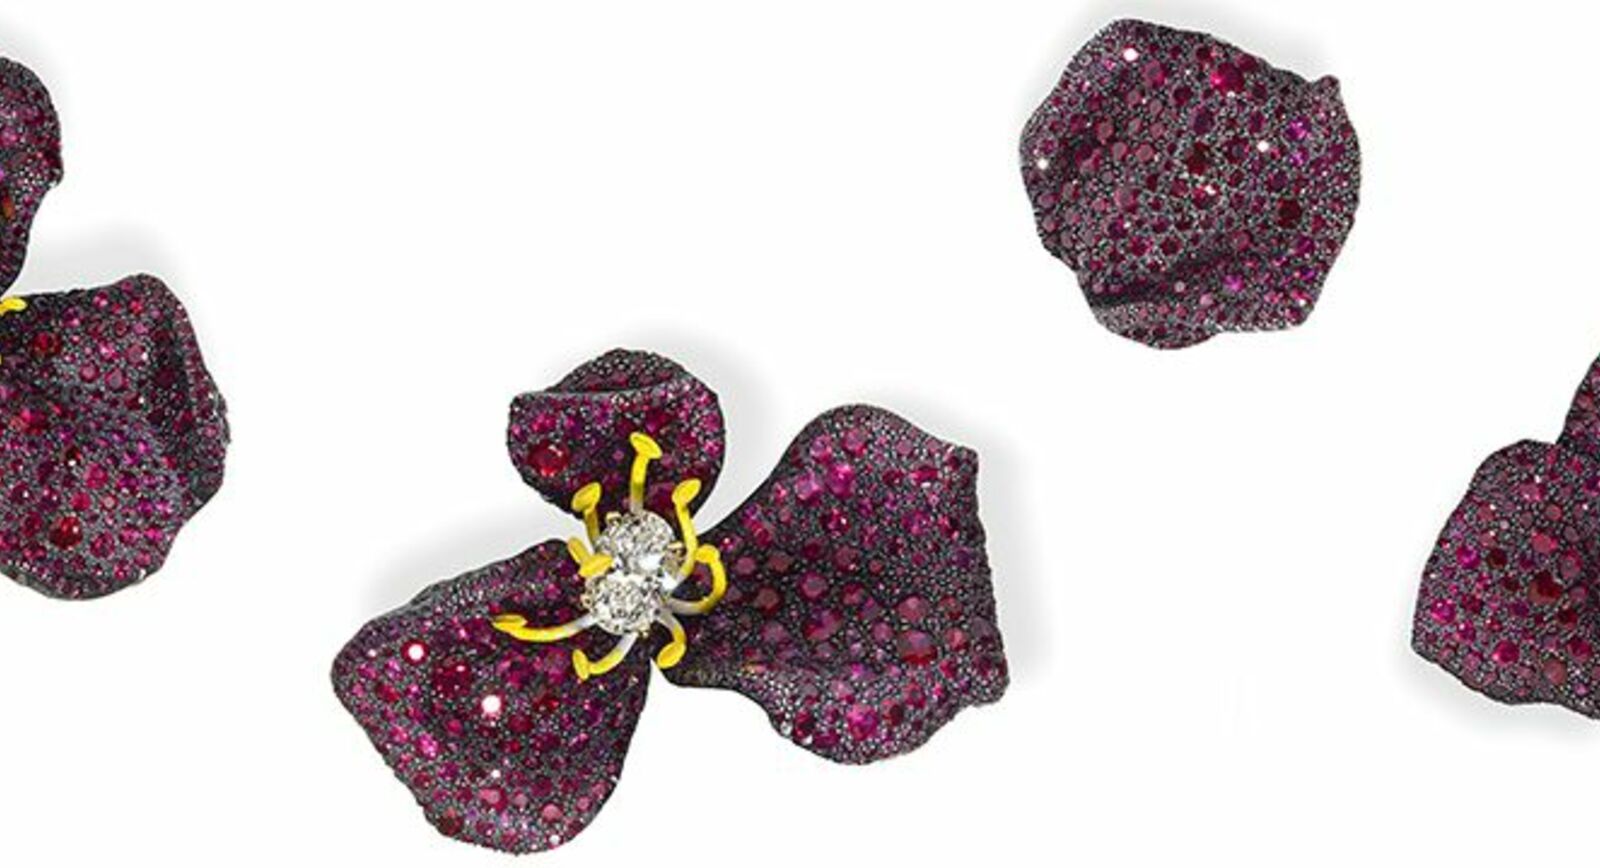 Cindy Chao Rose Petal Earrings – Experiment With A New Material